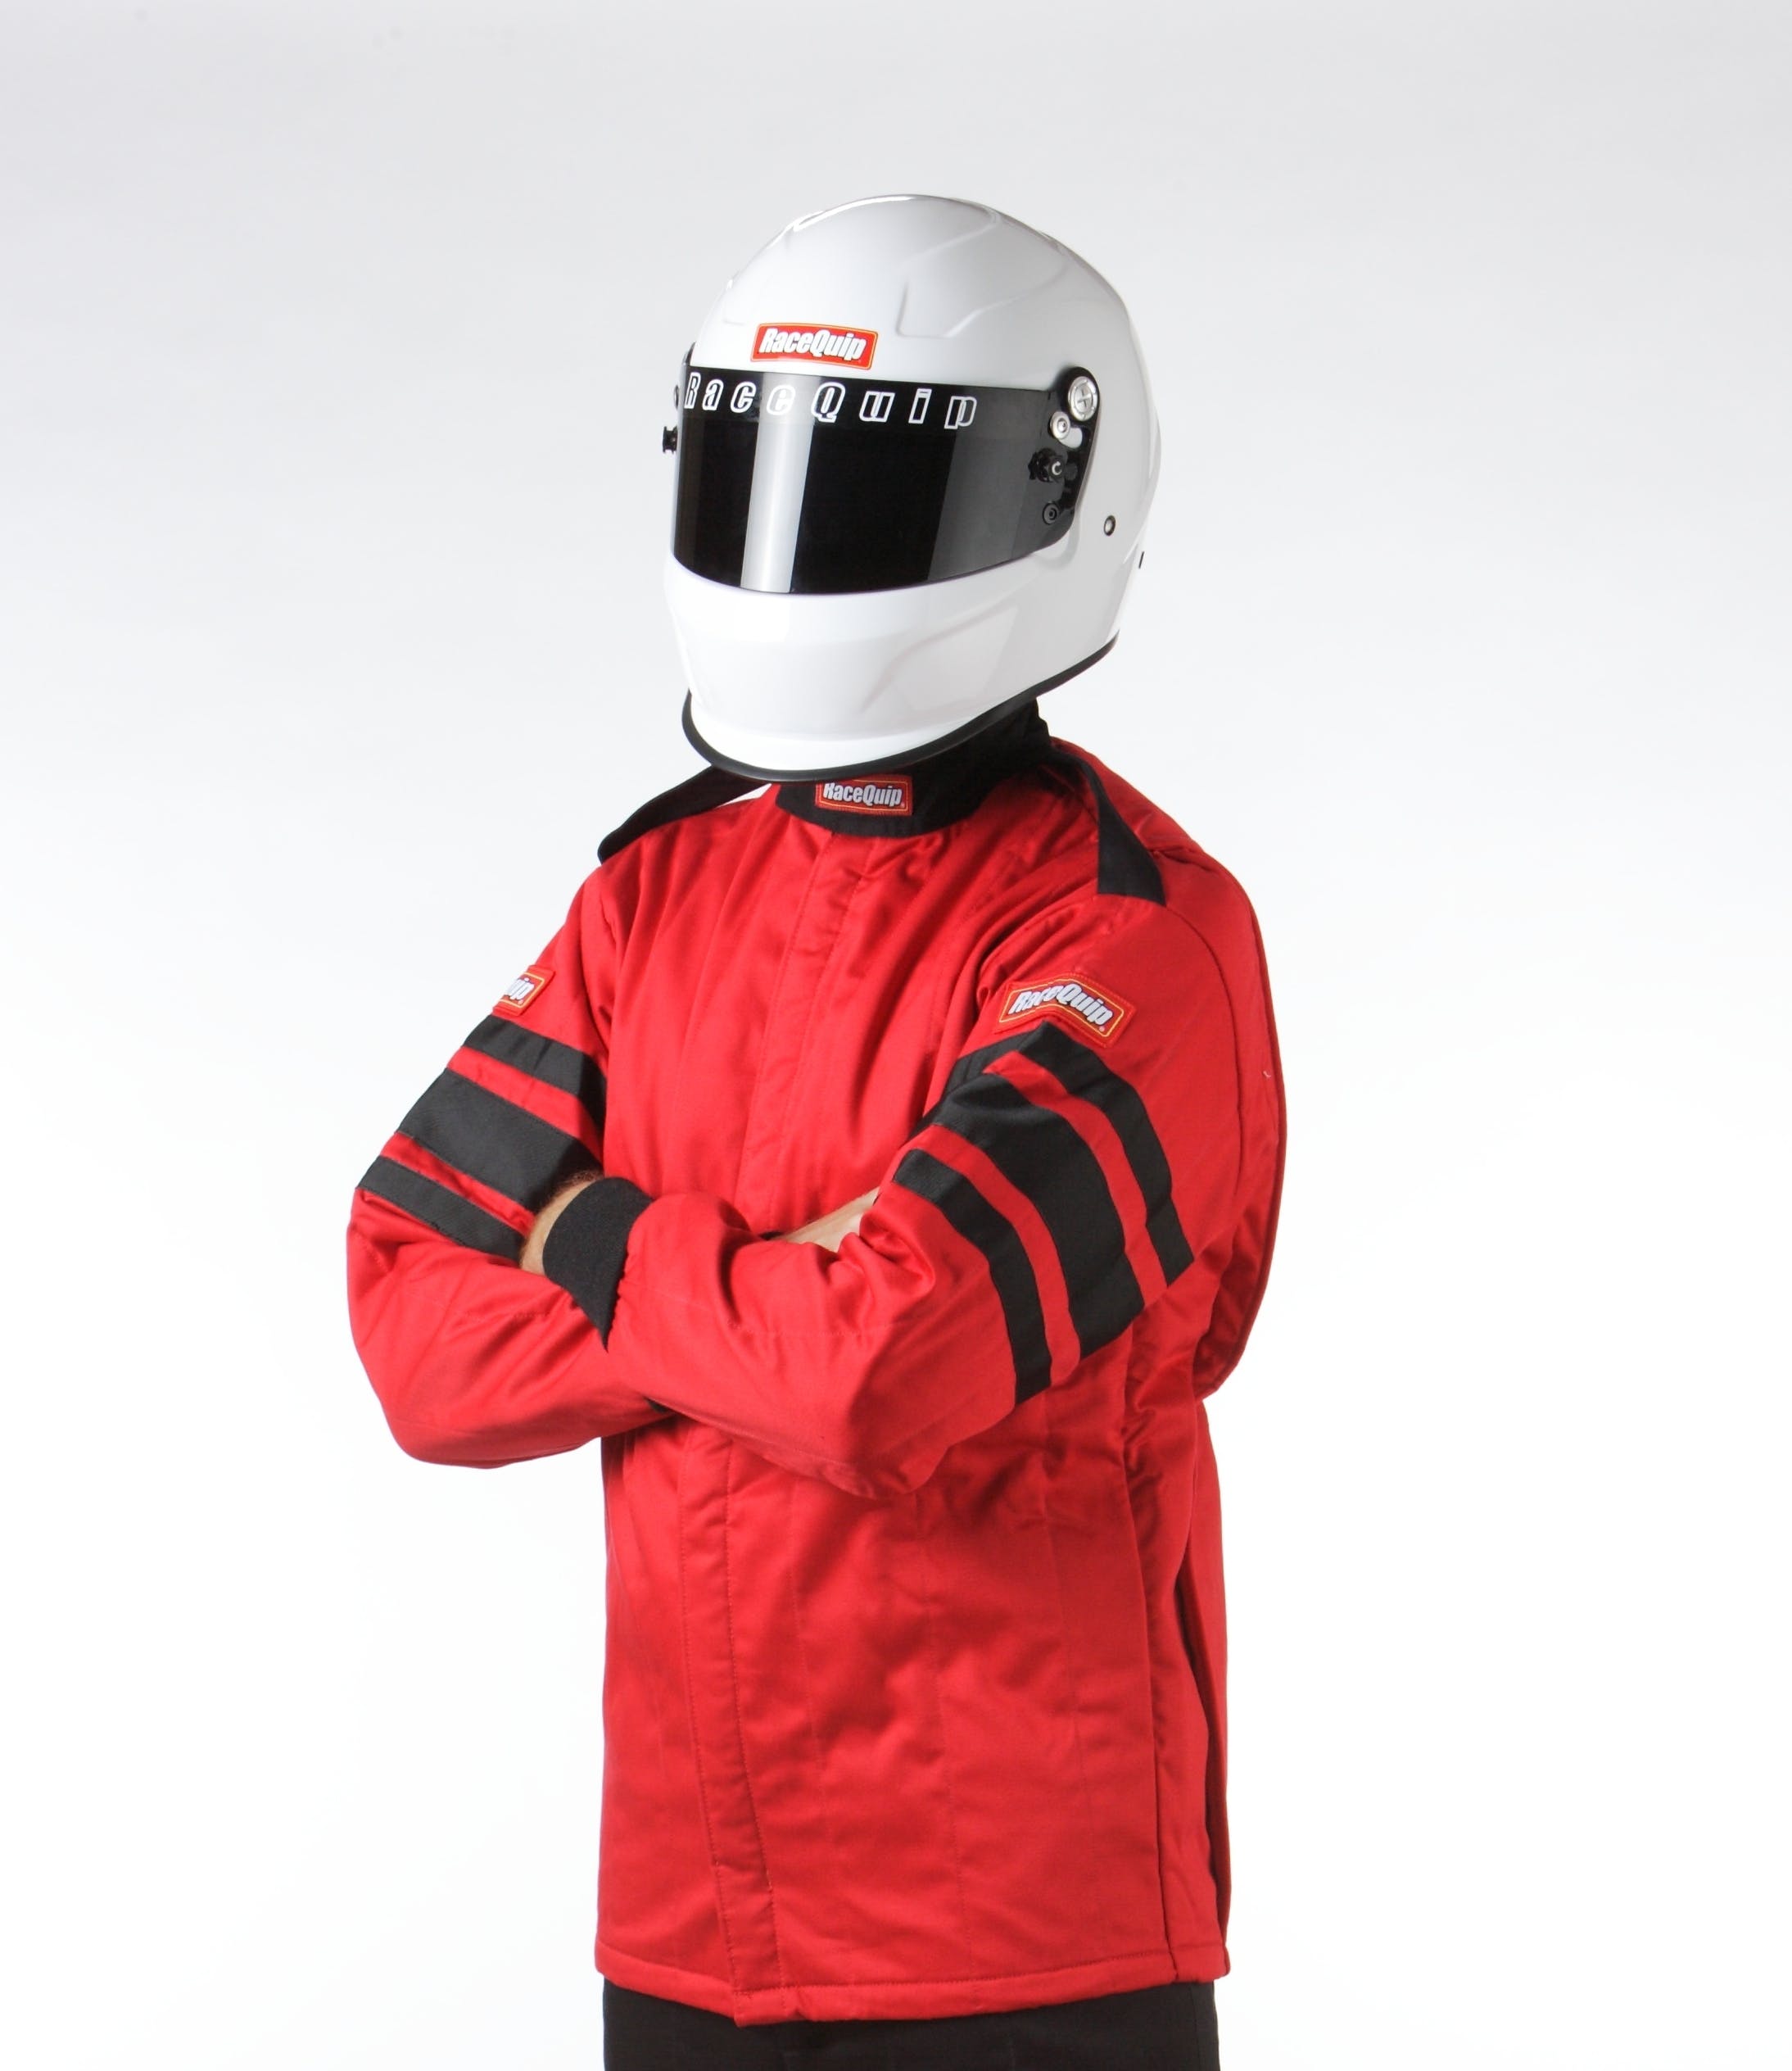 RaceQuip 121016 SFI-5 Pyrovatex Multi-Layer Racing Fire Jacket (Red, X-Large)